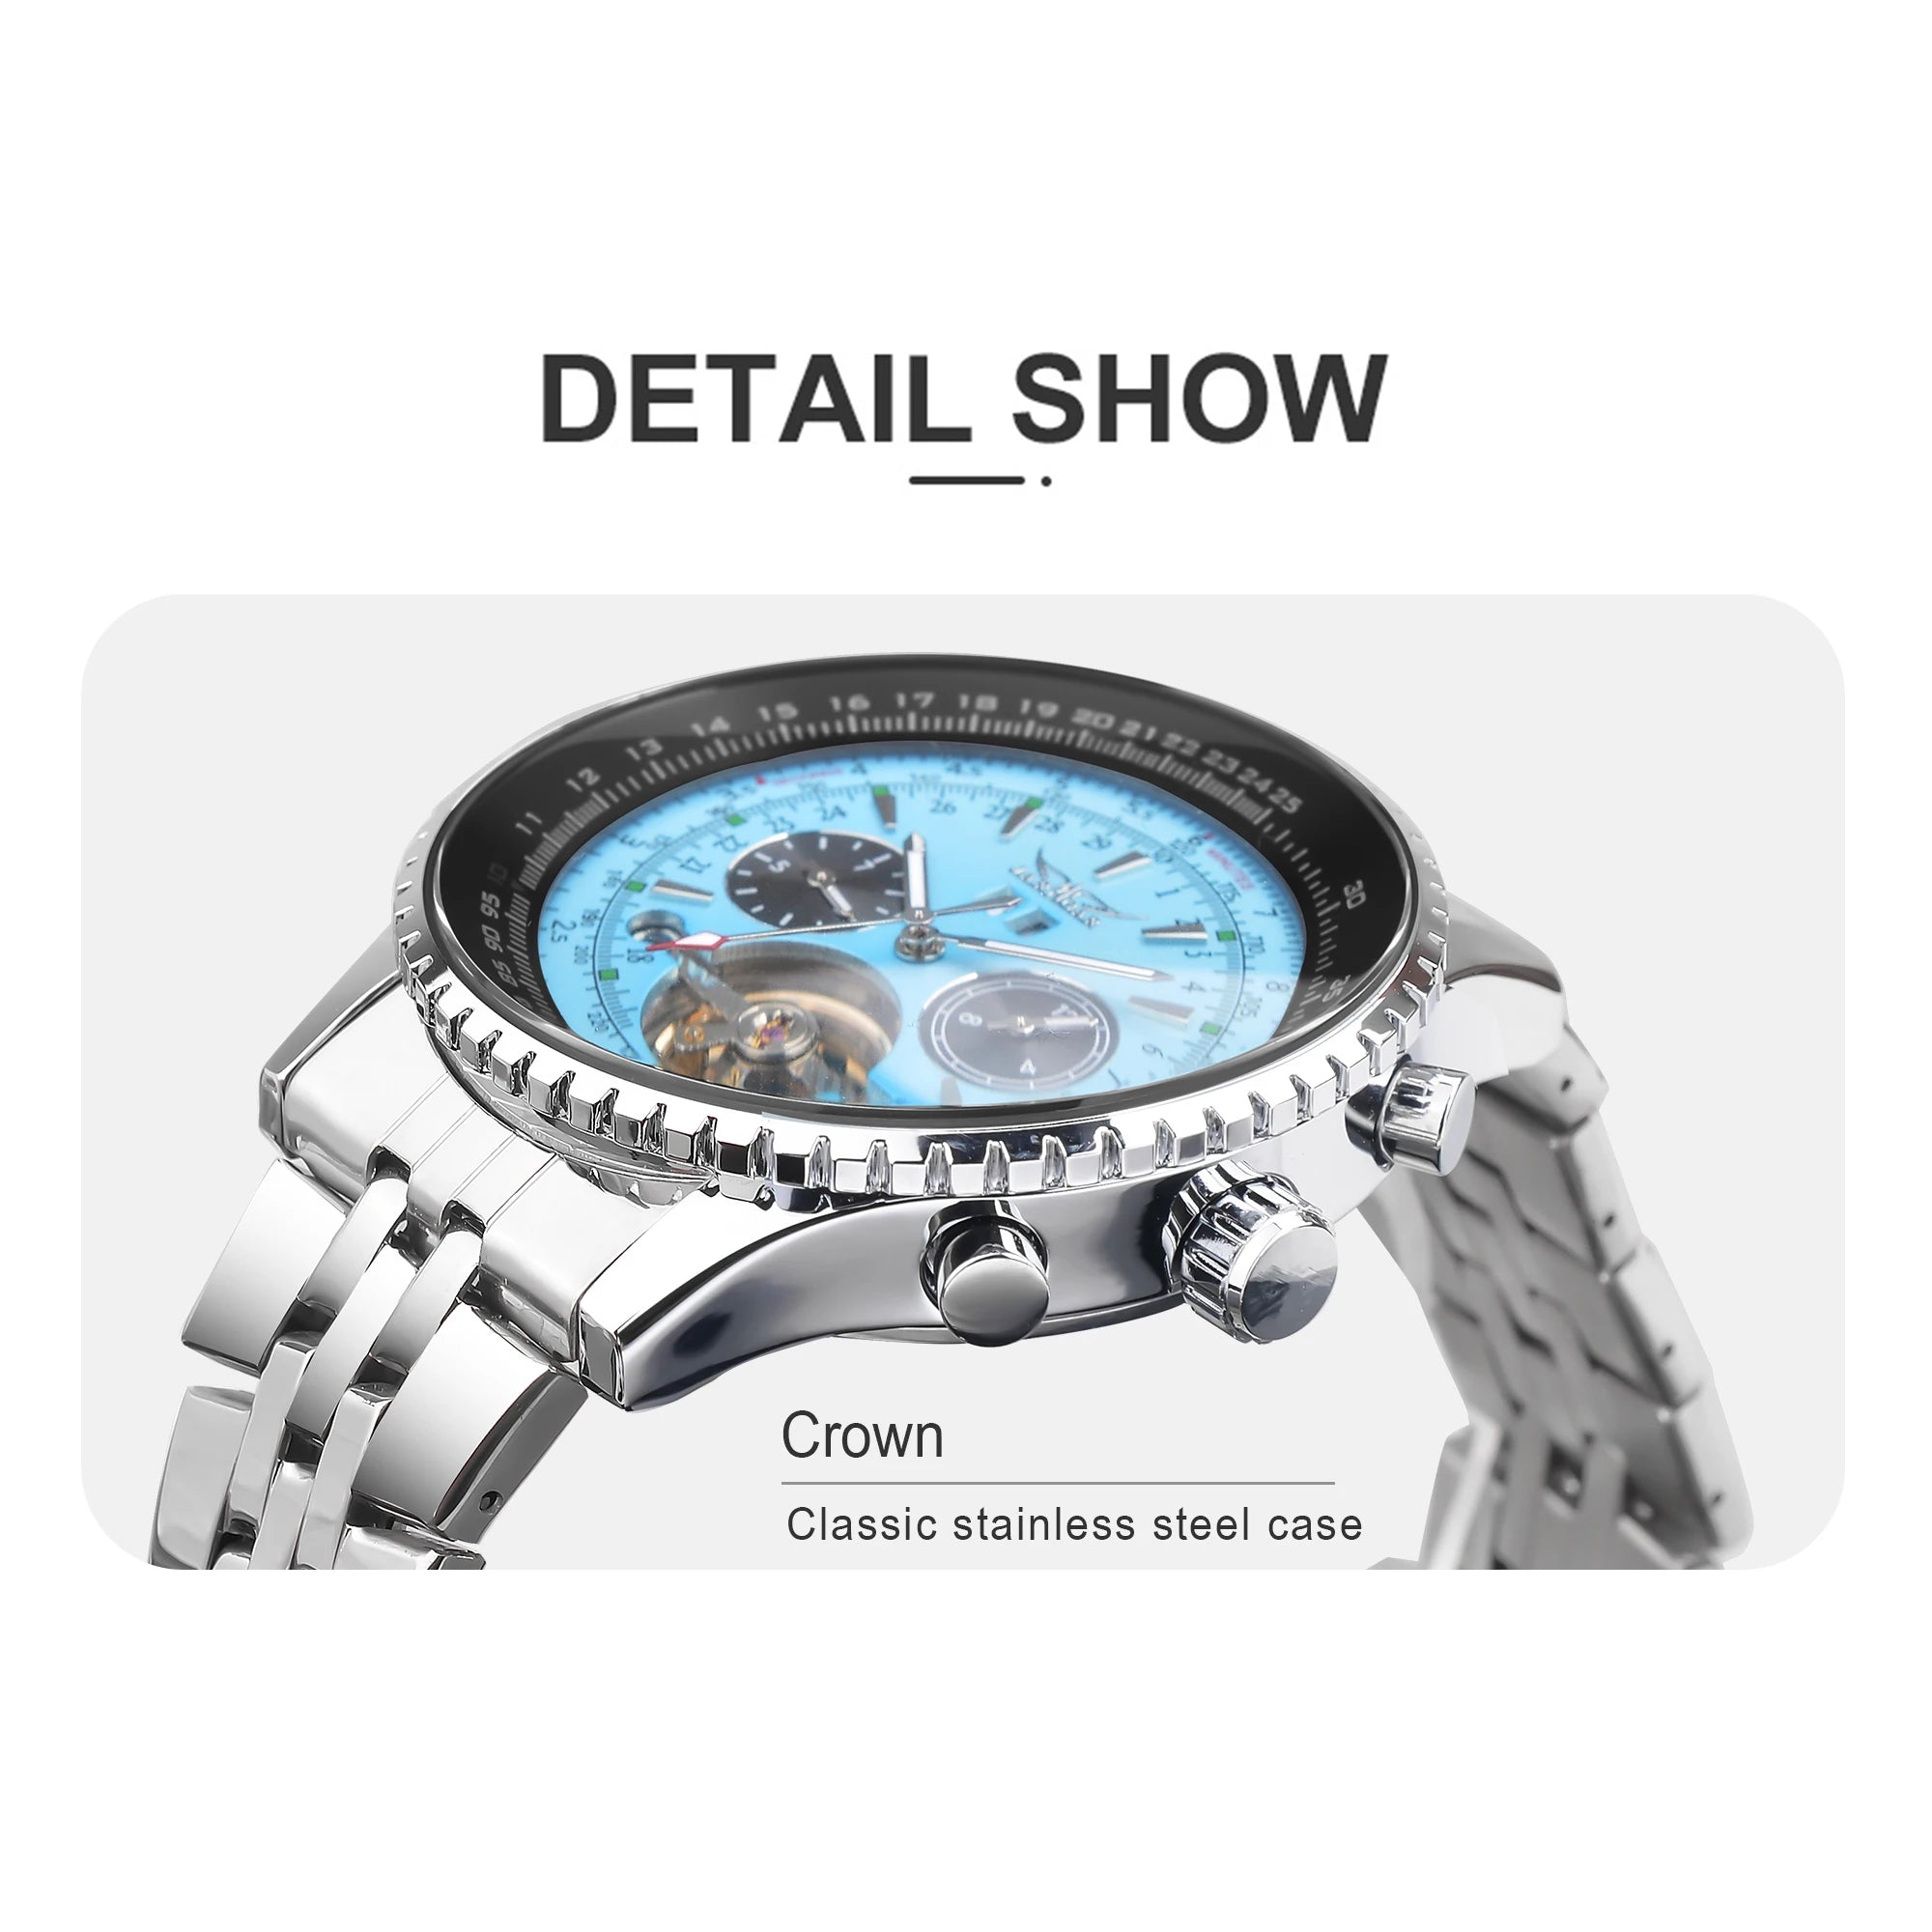 Jaragar Mens Automatic Mechanical Watch Fashion Tourbillon Blue Dial Date Display Stainless Steel Strap Military Sport Watches